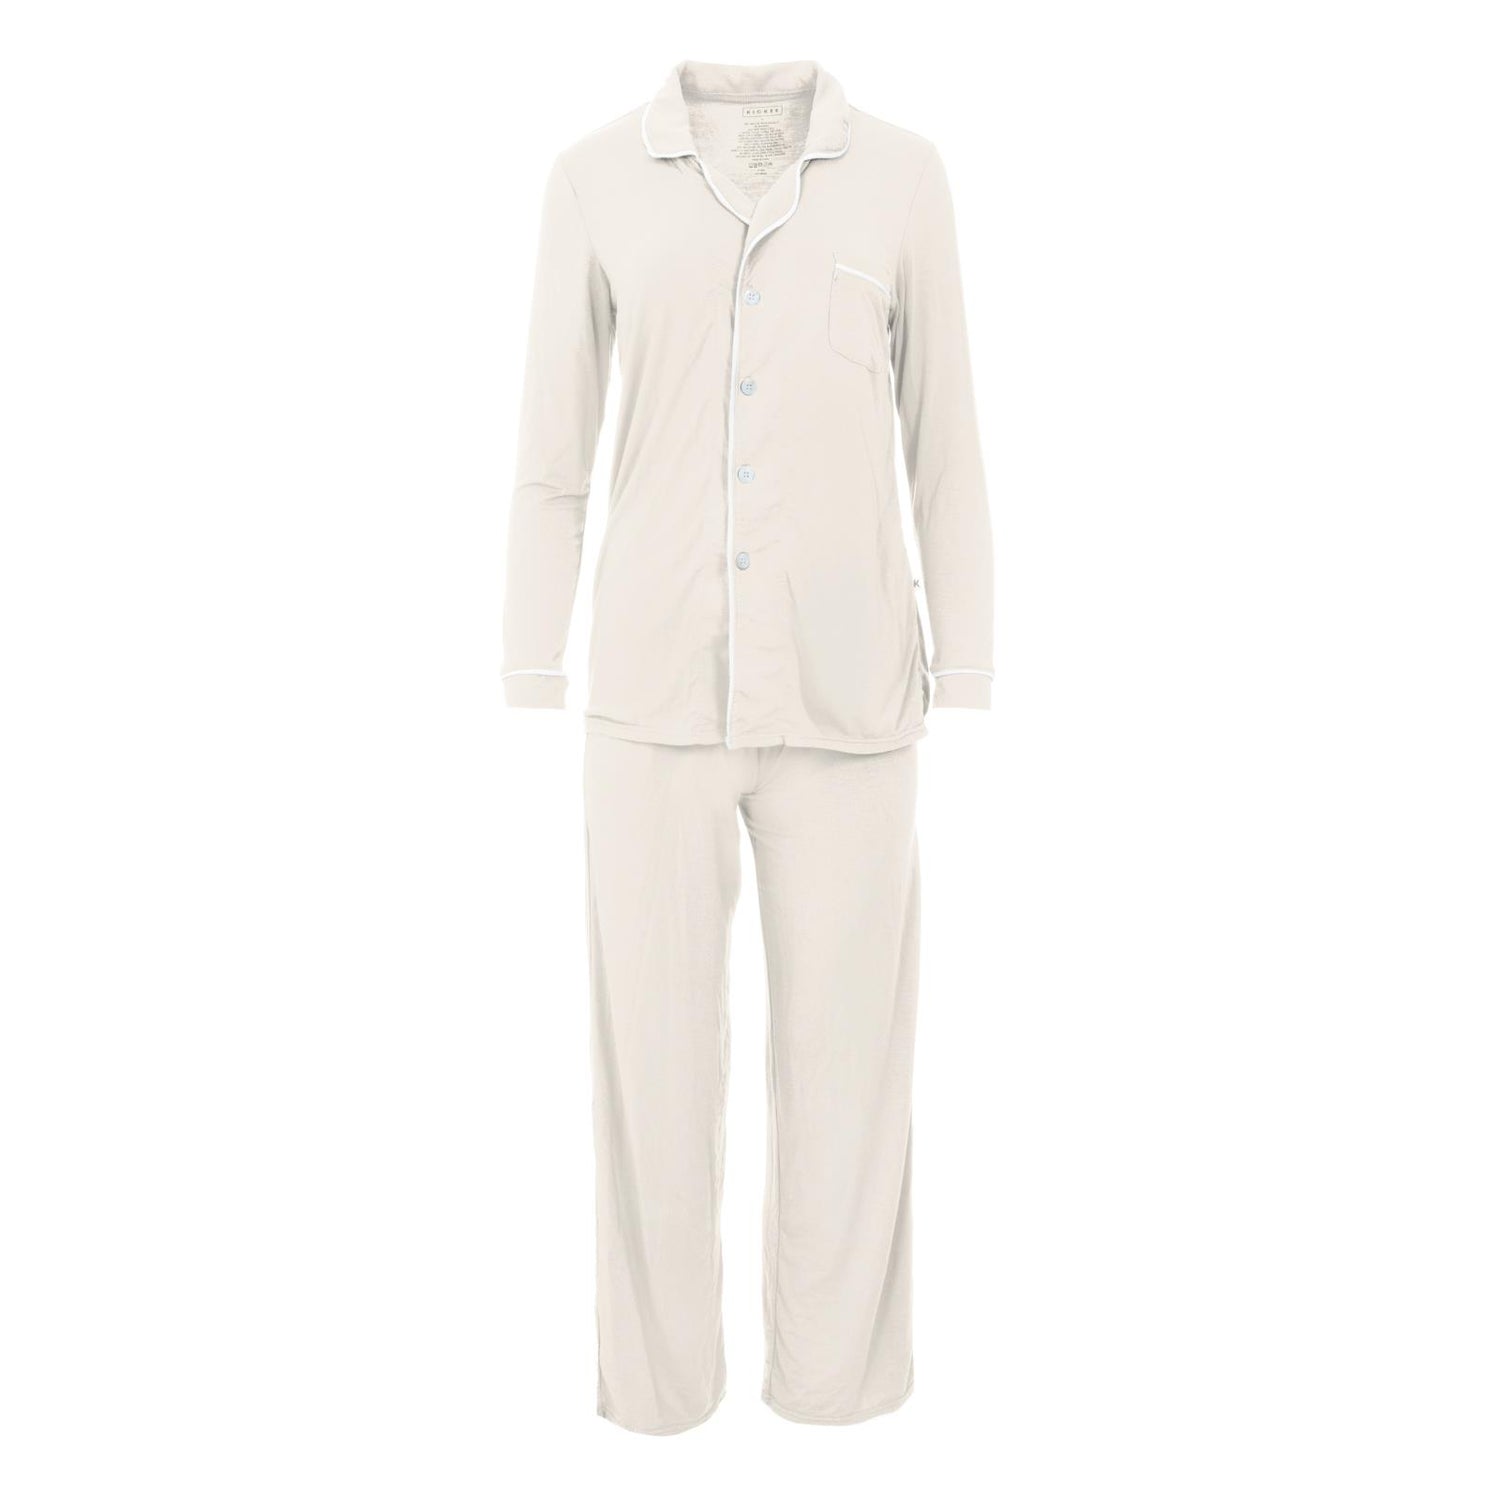 Women's Solid Woven Long Sleeve Collared Pajama Set in Natural